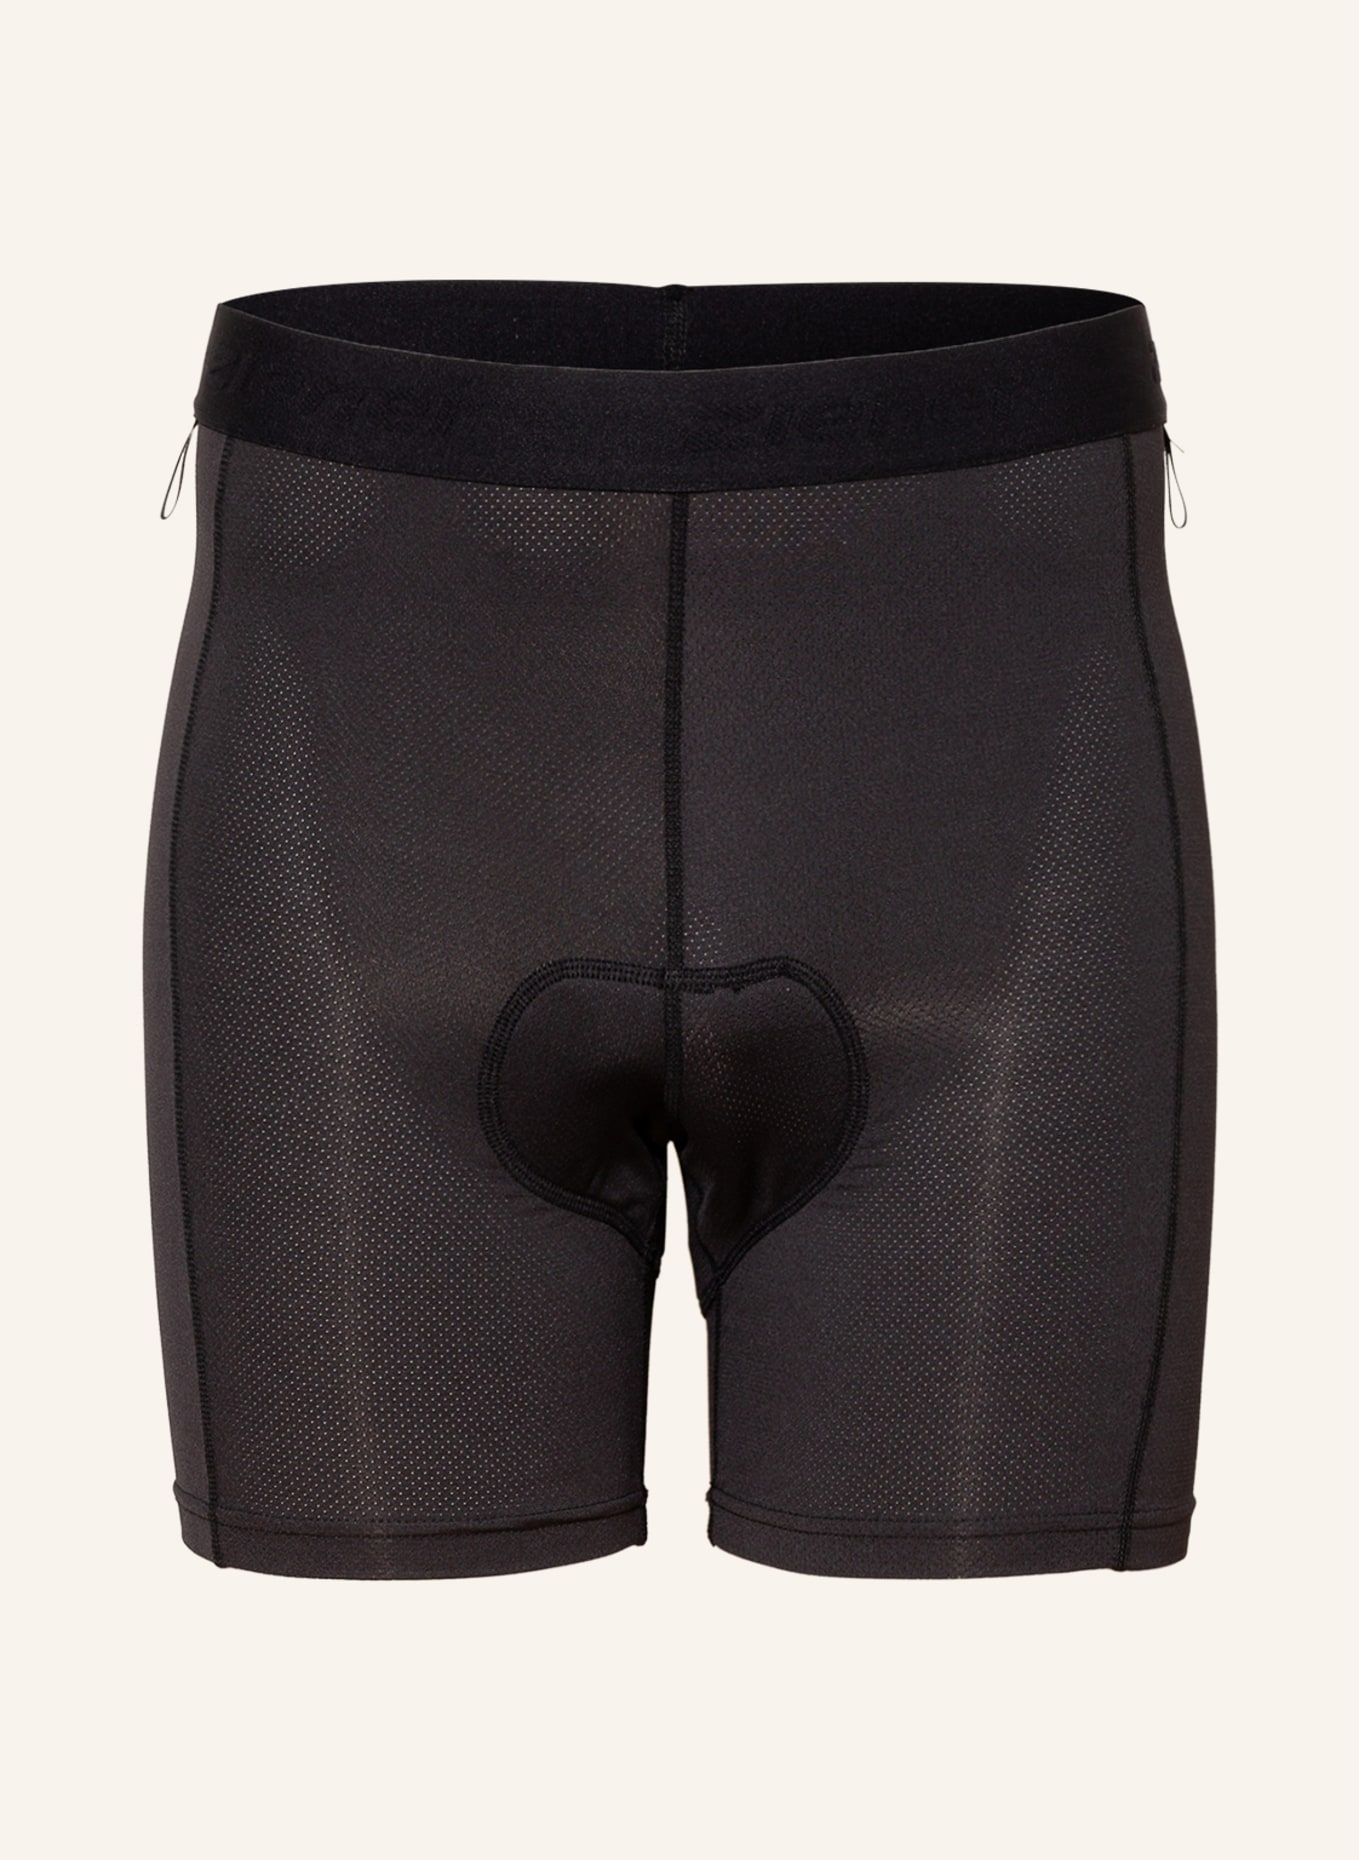 ziener Cycling undershorts NEPO X-FUNCTION with padded mesh insert, Color: BLACK (Image 1)